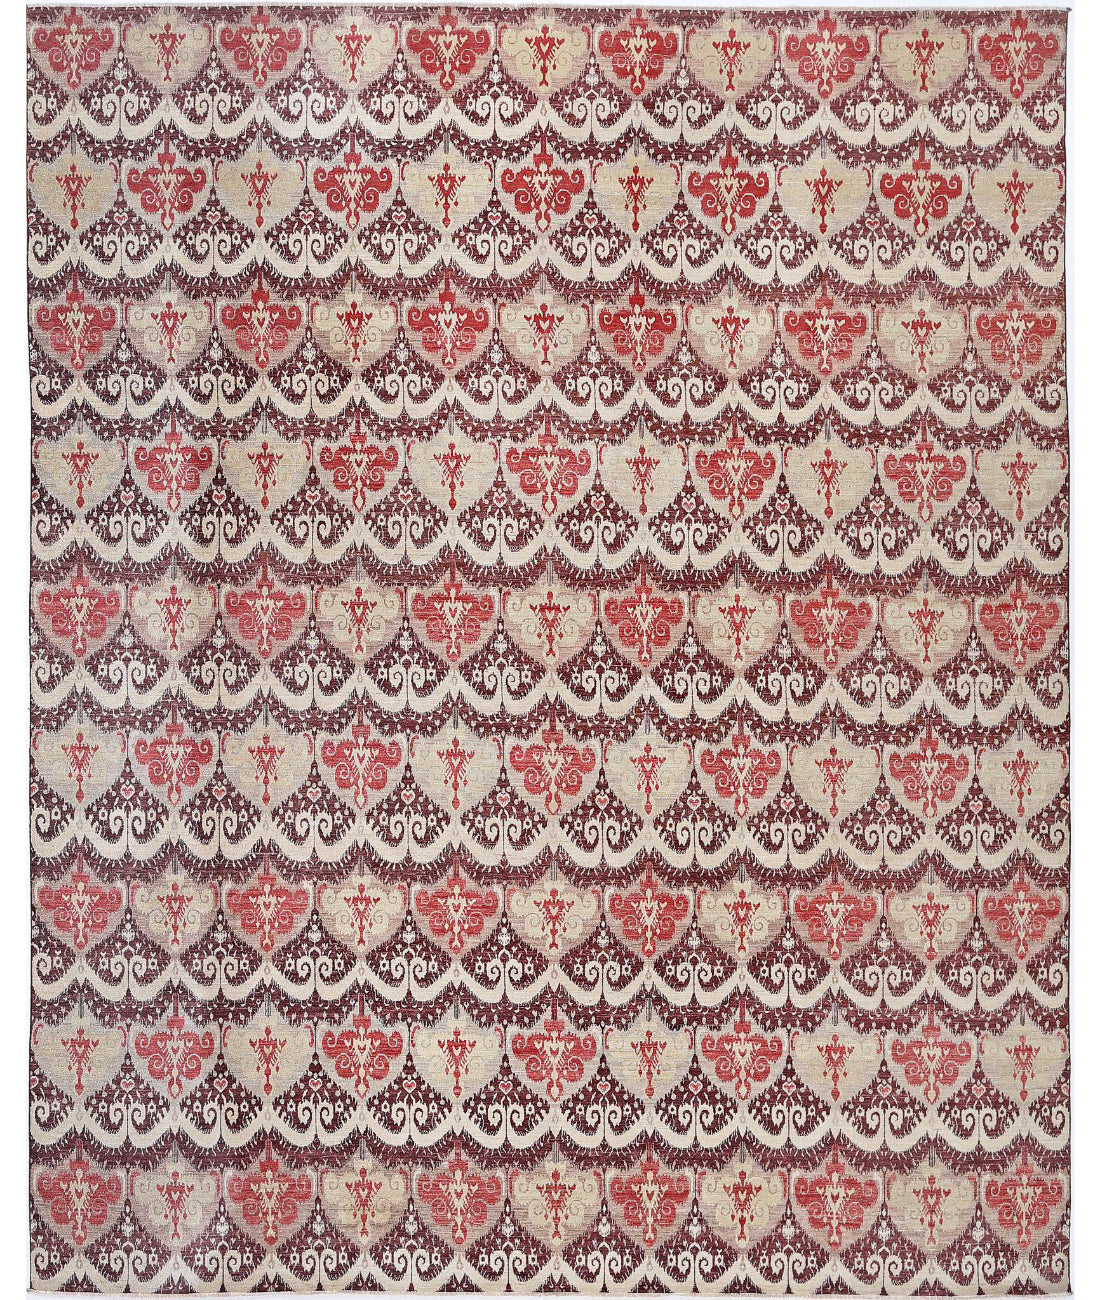 Hand Knotted Ikat Wool Rug - 11'9'' x 14'8'' 11'9'' x 14'8'' (353 X 440) / Brown / Ivory